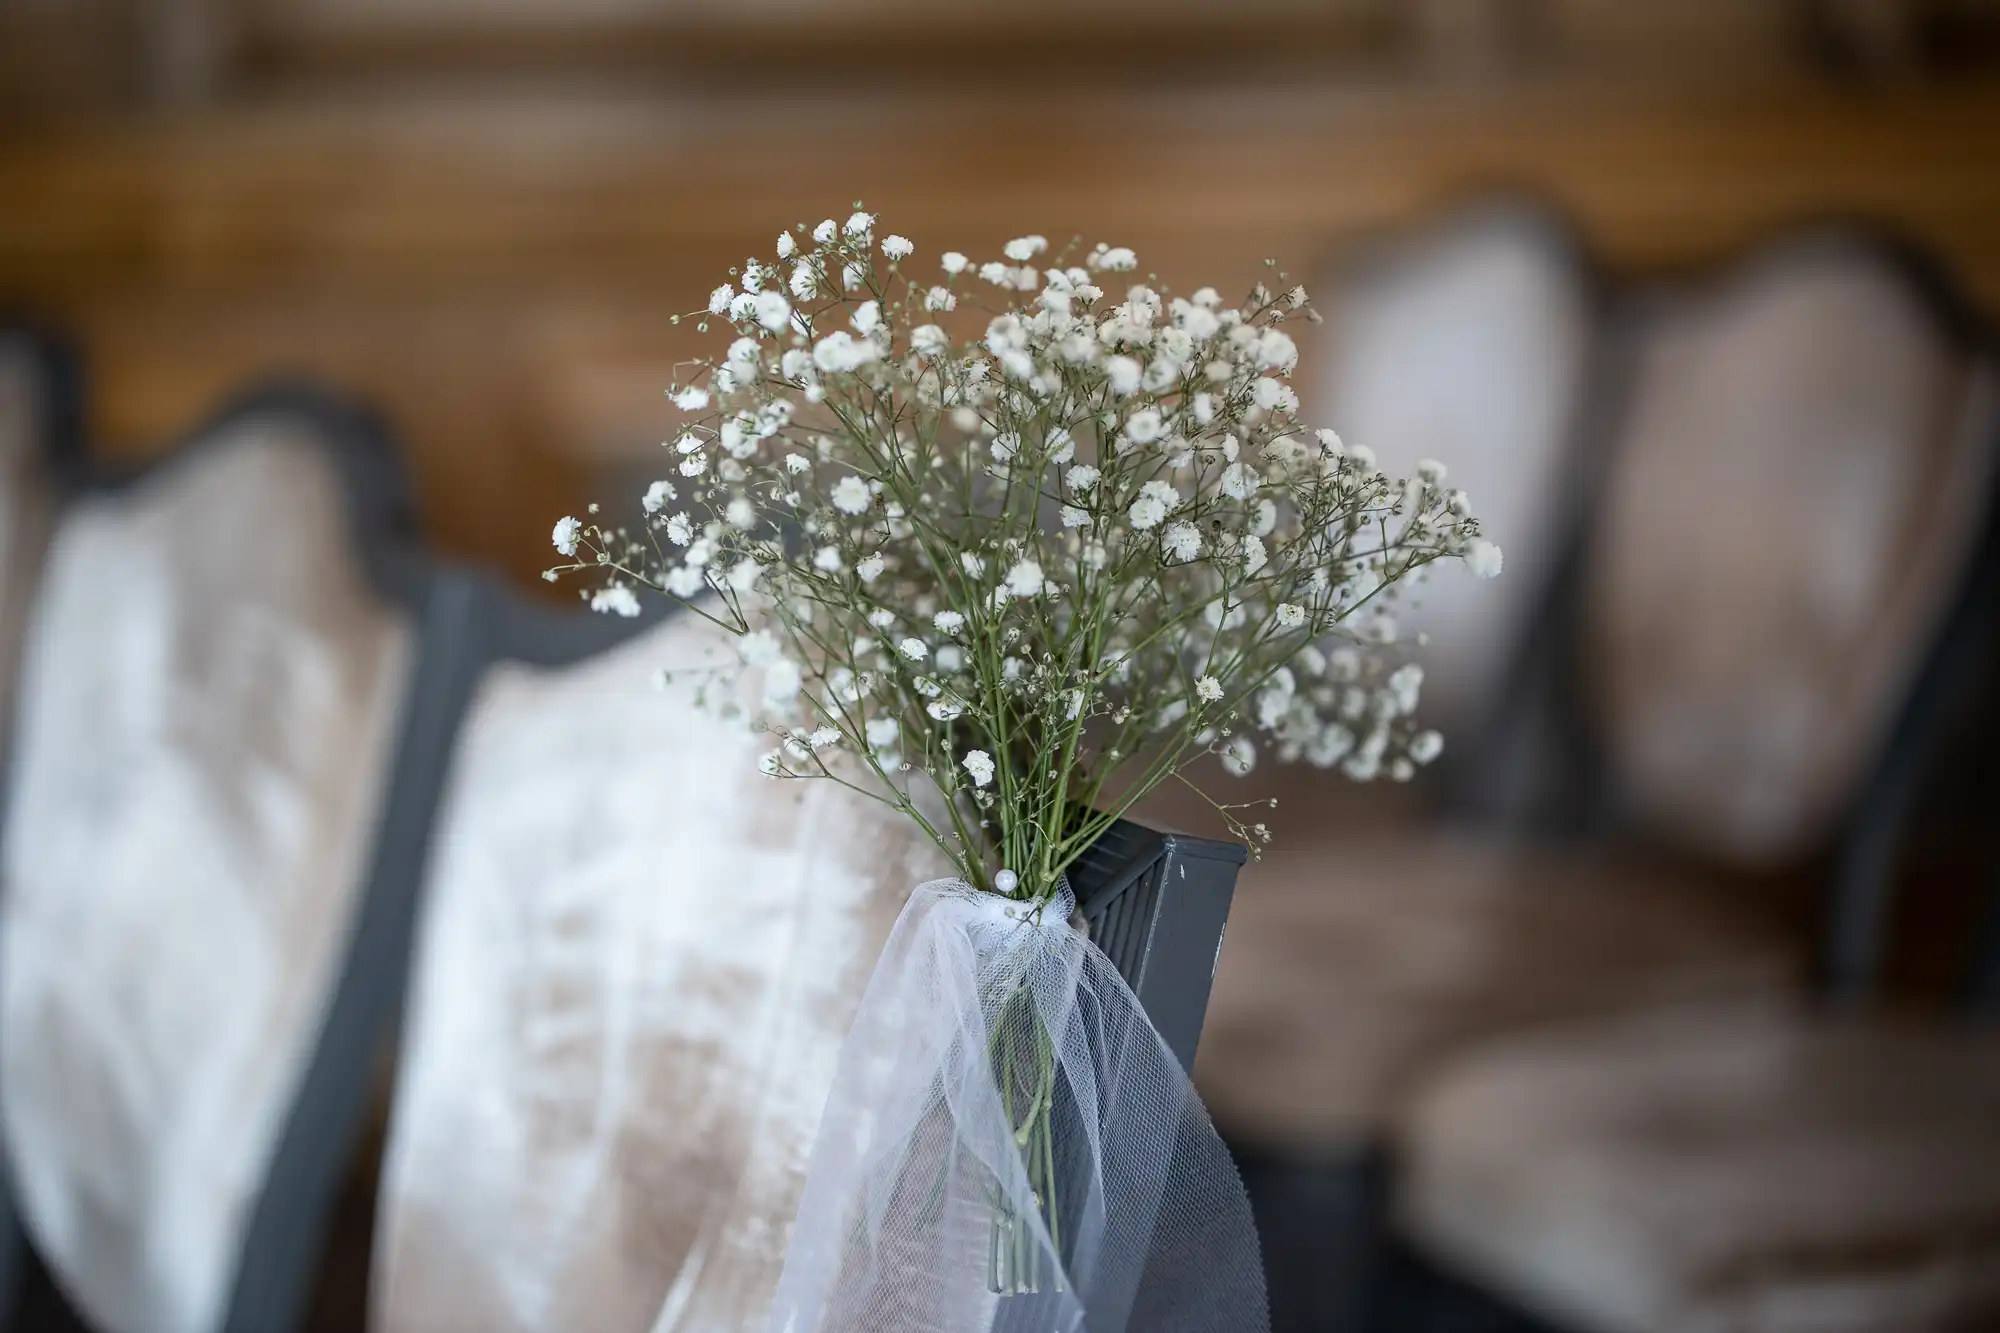 A bouquet of baby's breath flowers attached to a chair with a white ribbon in a rustic indoor setting.